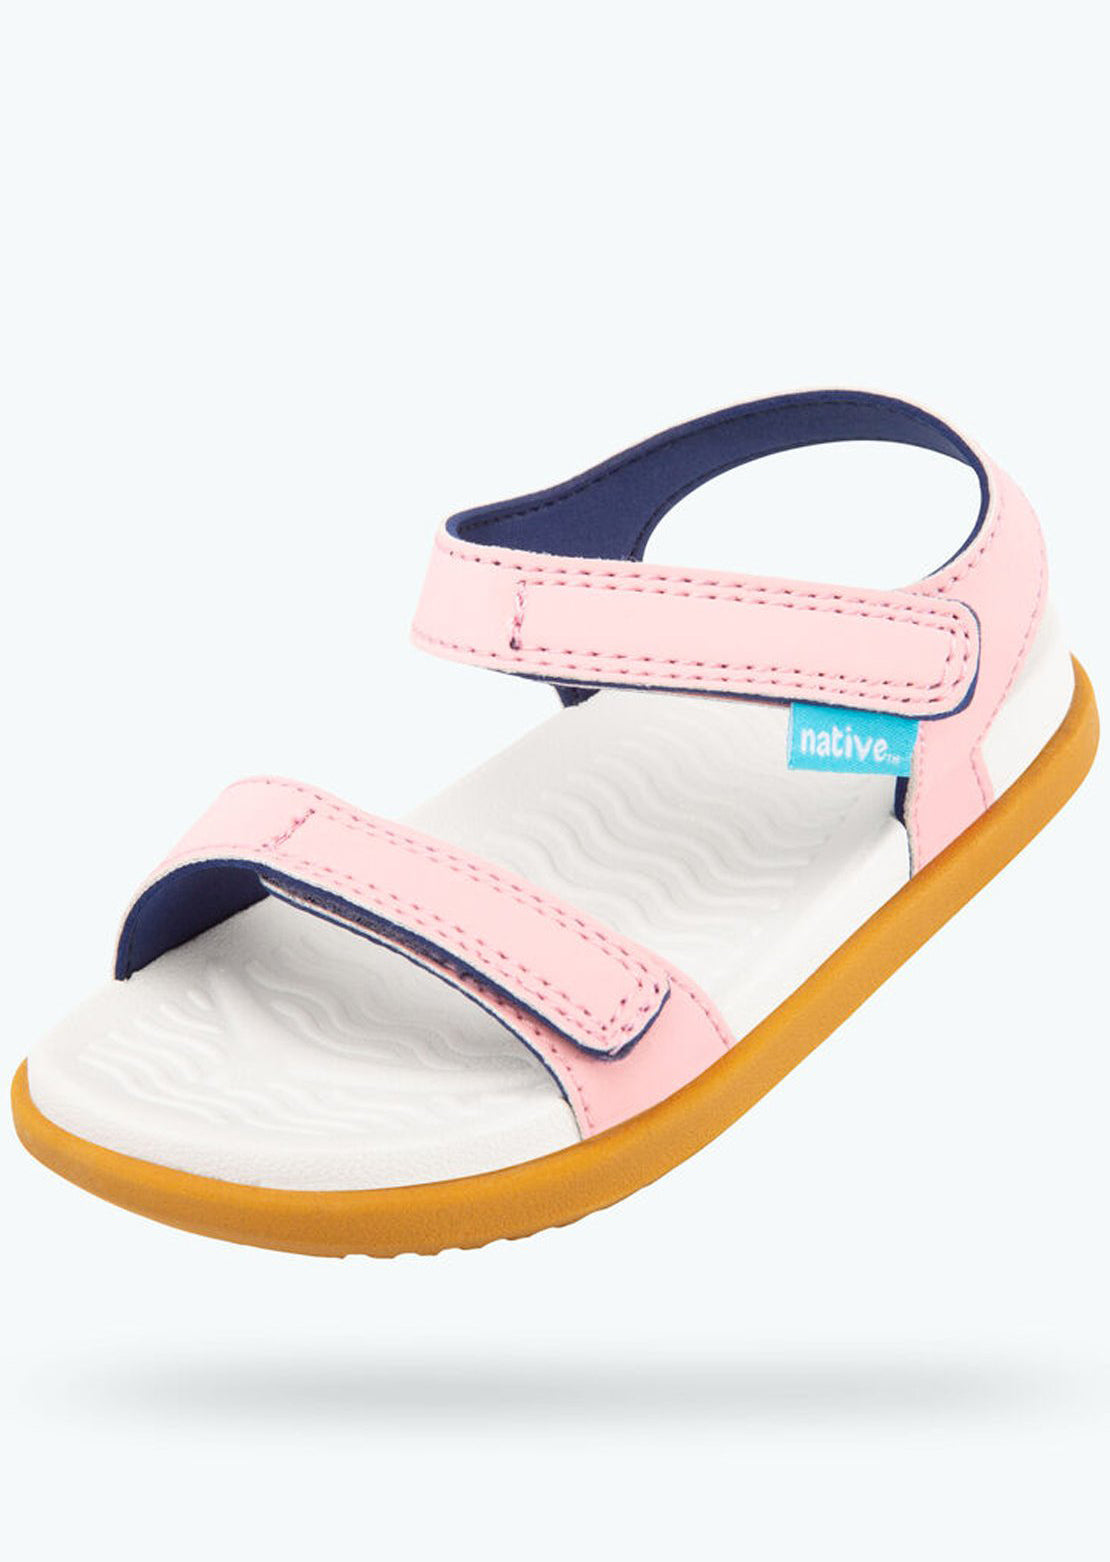 Native Toddler Charley Sandals Princess Pink/Shell White/Toffee Brown 63109100